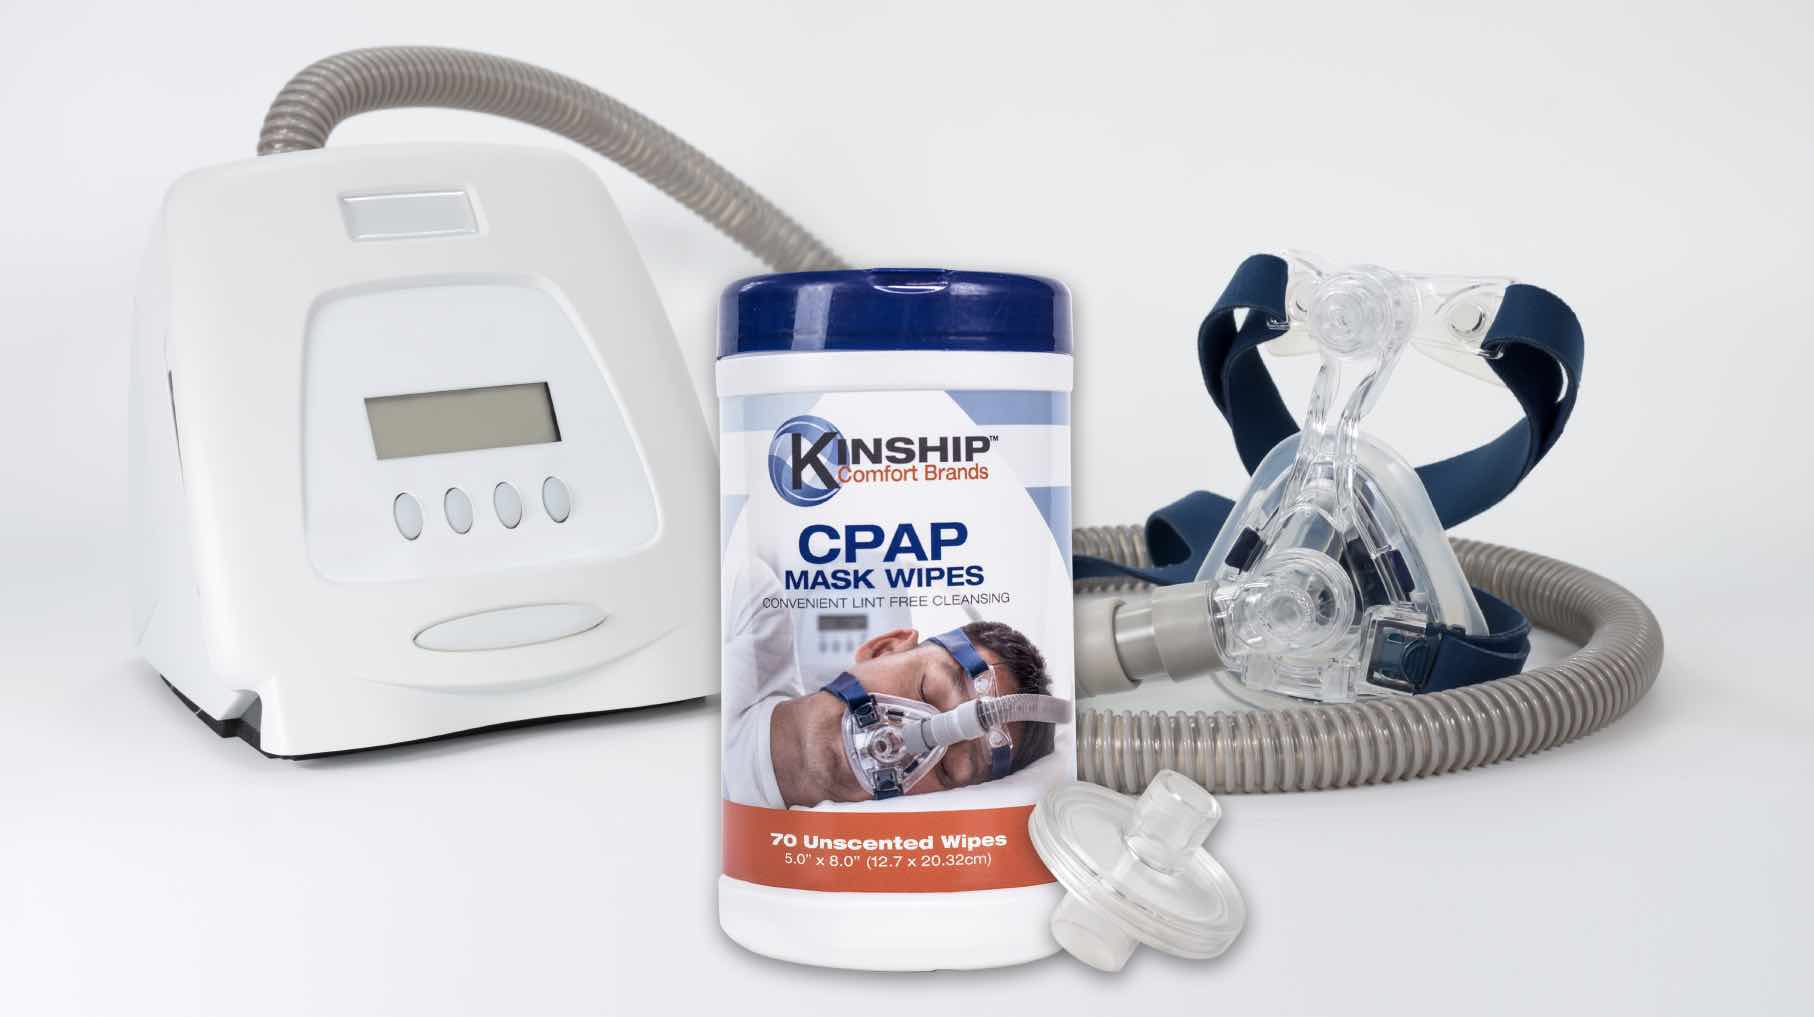 CPAP Machine, mask and filter with CPAP mask wipes.